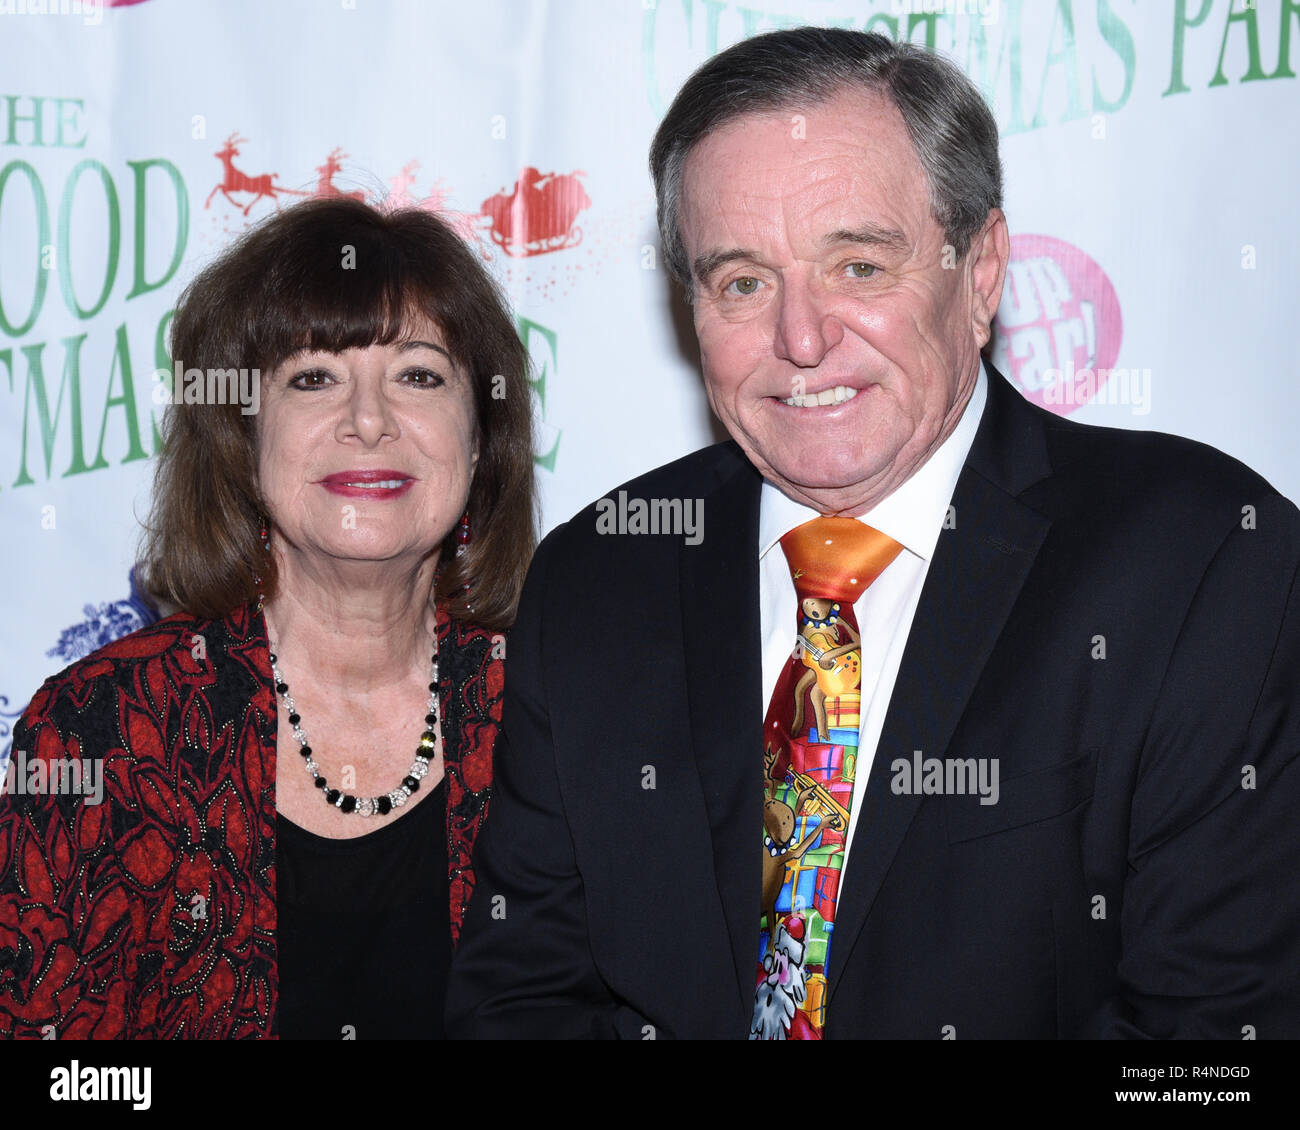 Teresa Modnick and Jerry Mathers arrives at the 87th Annual Hollywood ...